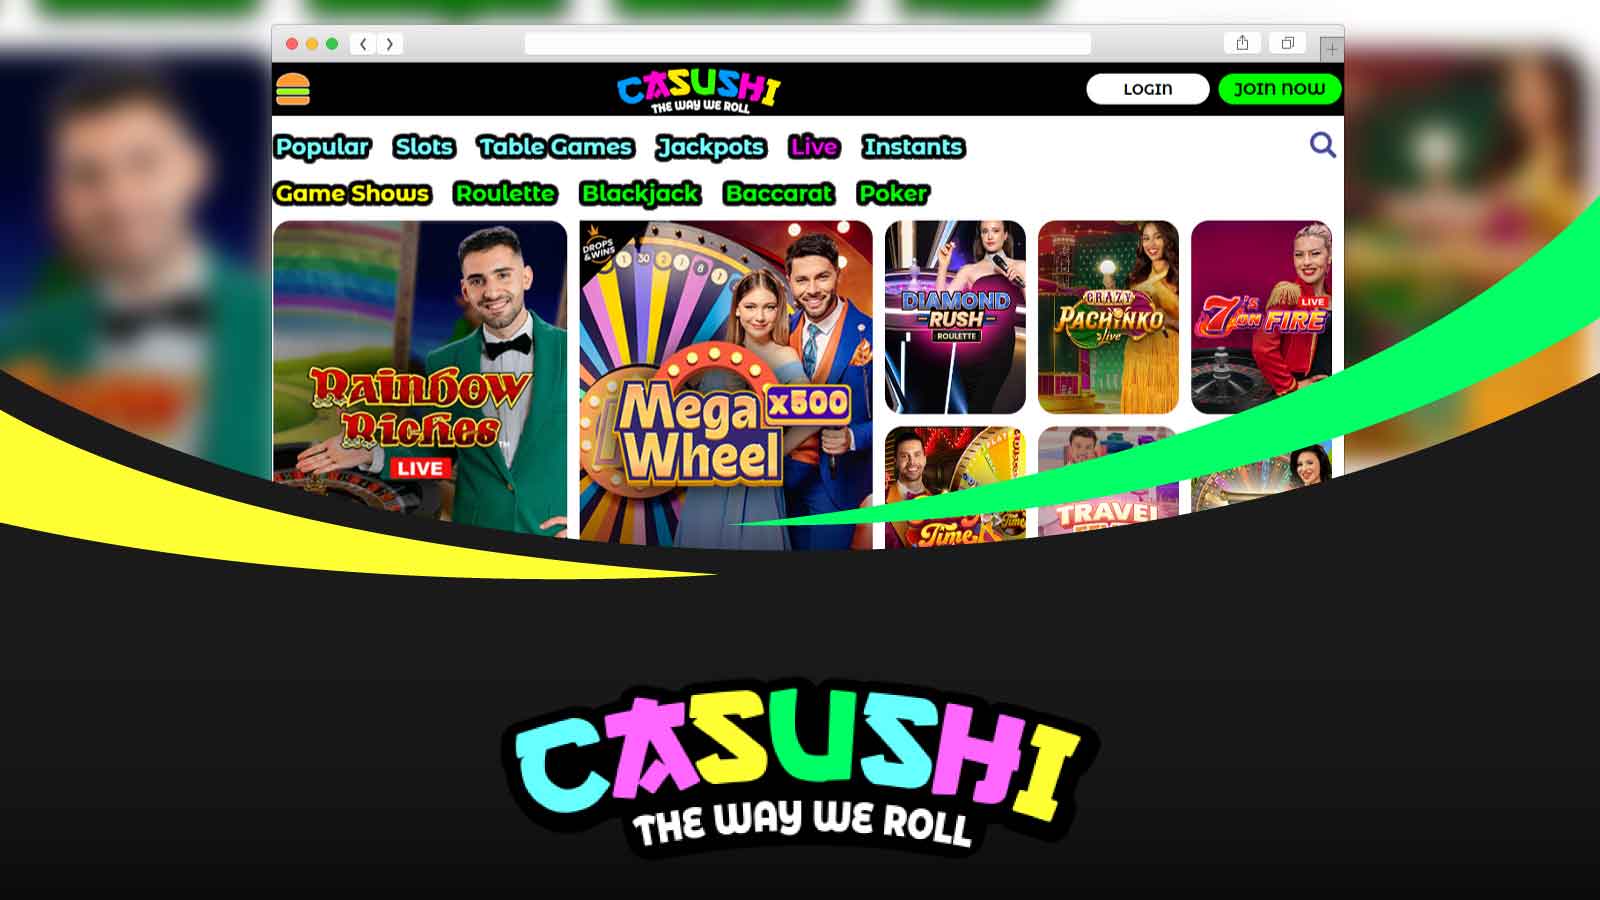 Casushi Casino: Better for Live Games